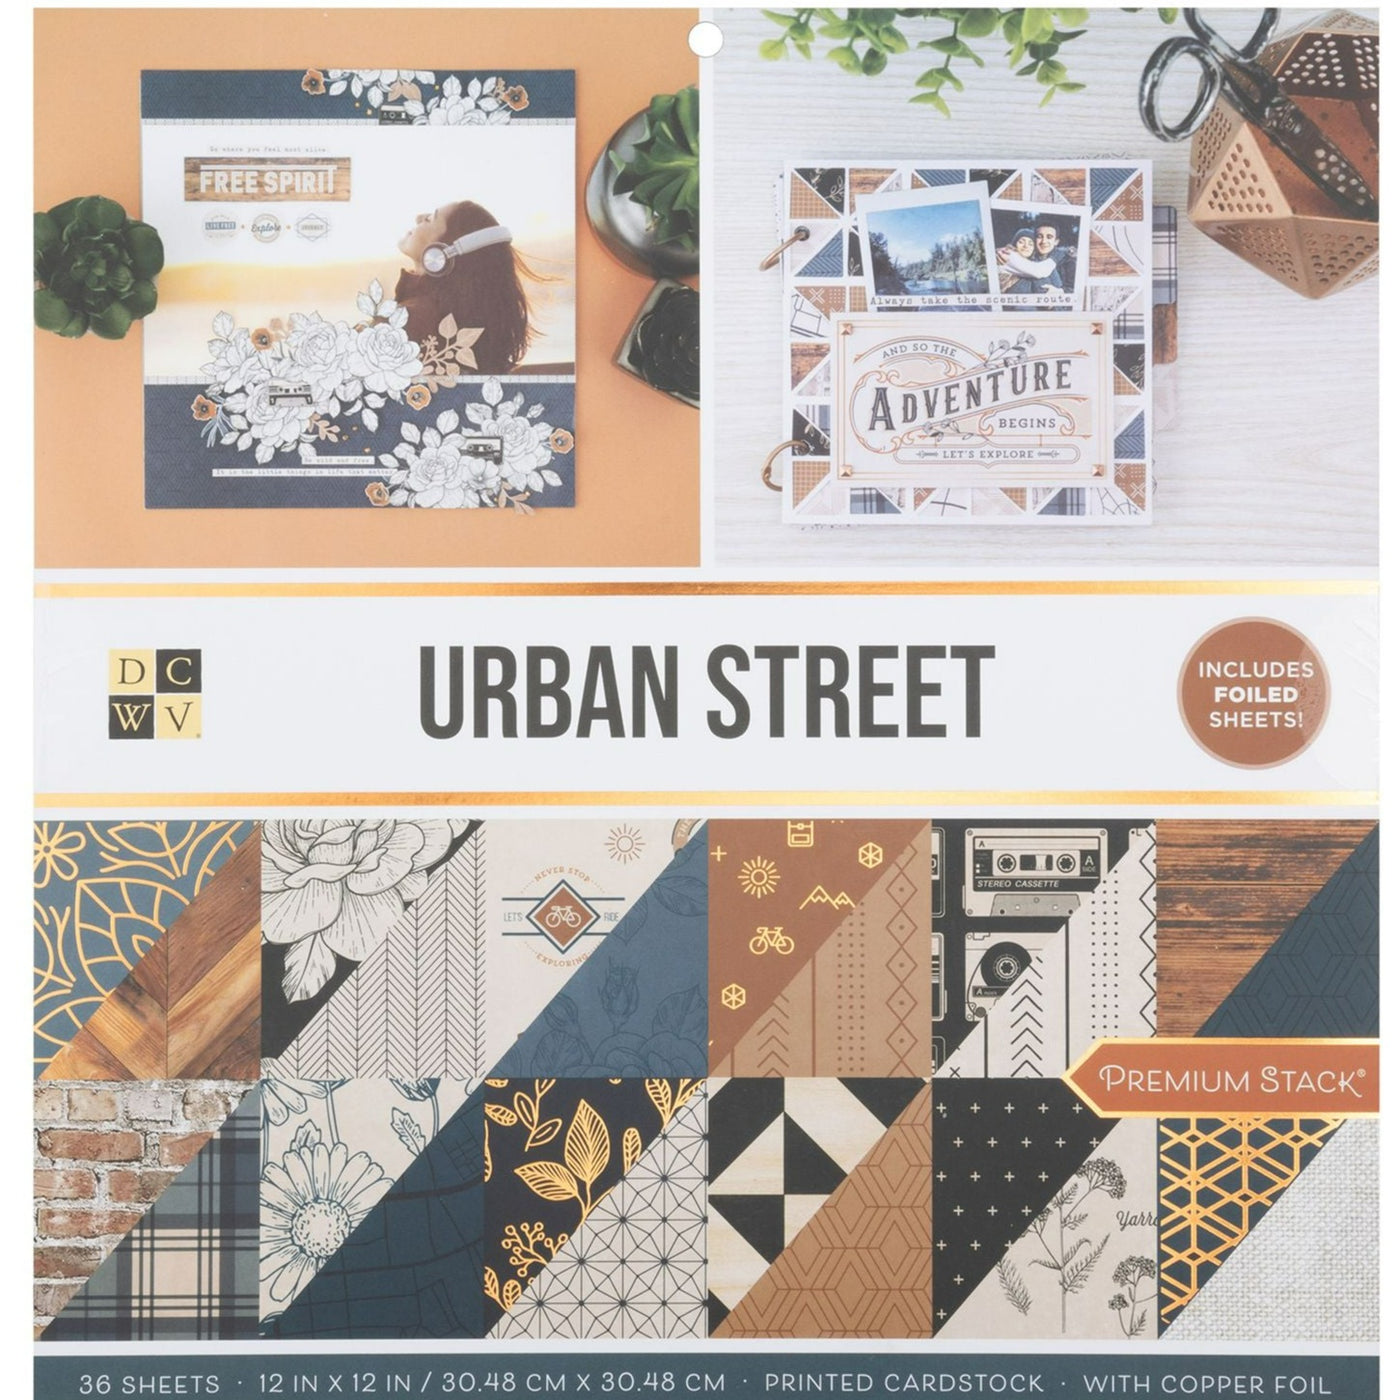 Thirty-six sheets of elegant urban prints will inspire your paper crafting. This stack includes 36 sheets of 12x12-inch paper, double-sided, with copper foil accents.